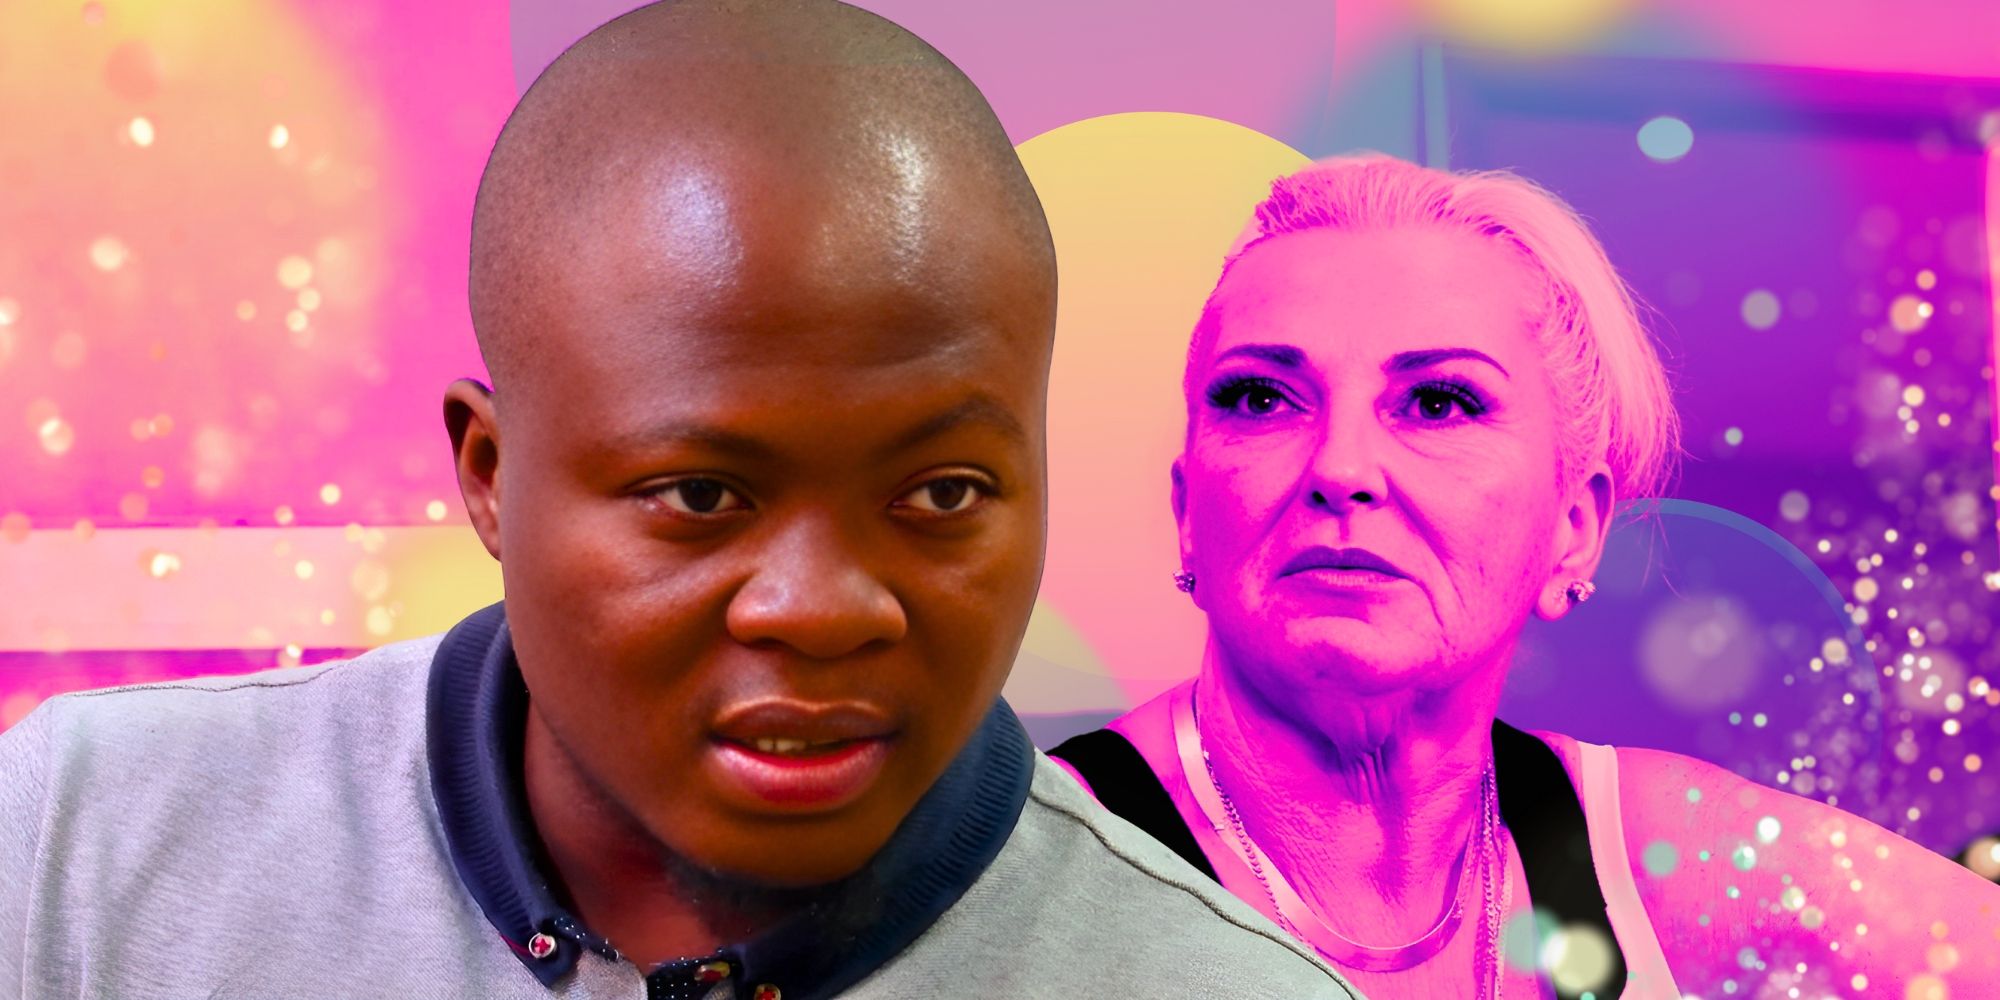 michael ilesanmi and angela deem from 90 day fiance in montage featuring intense expressions and pink and yellow background